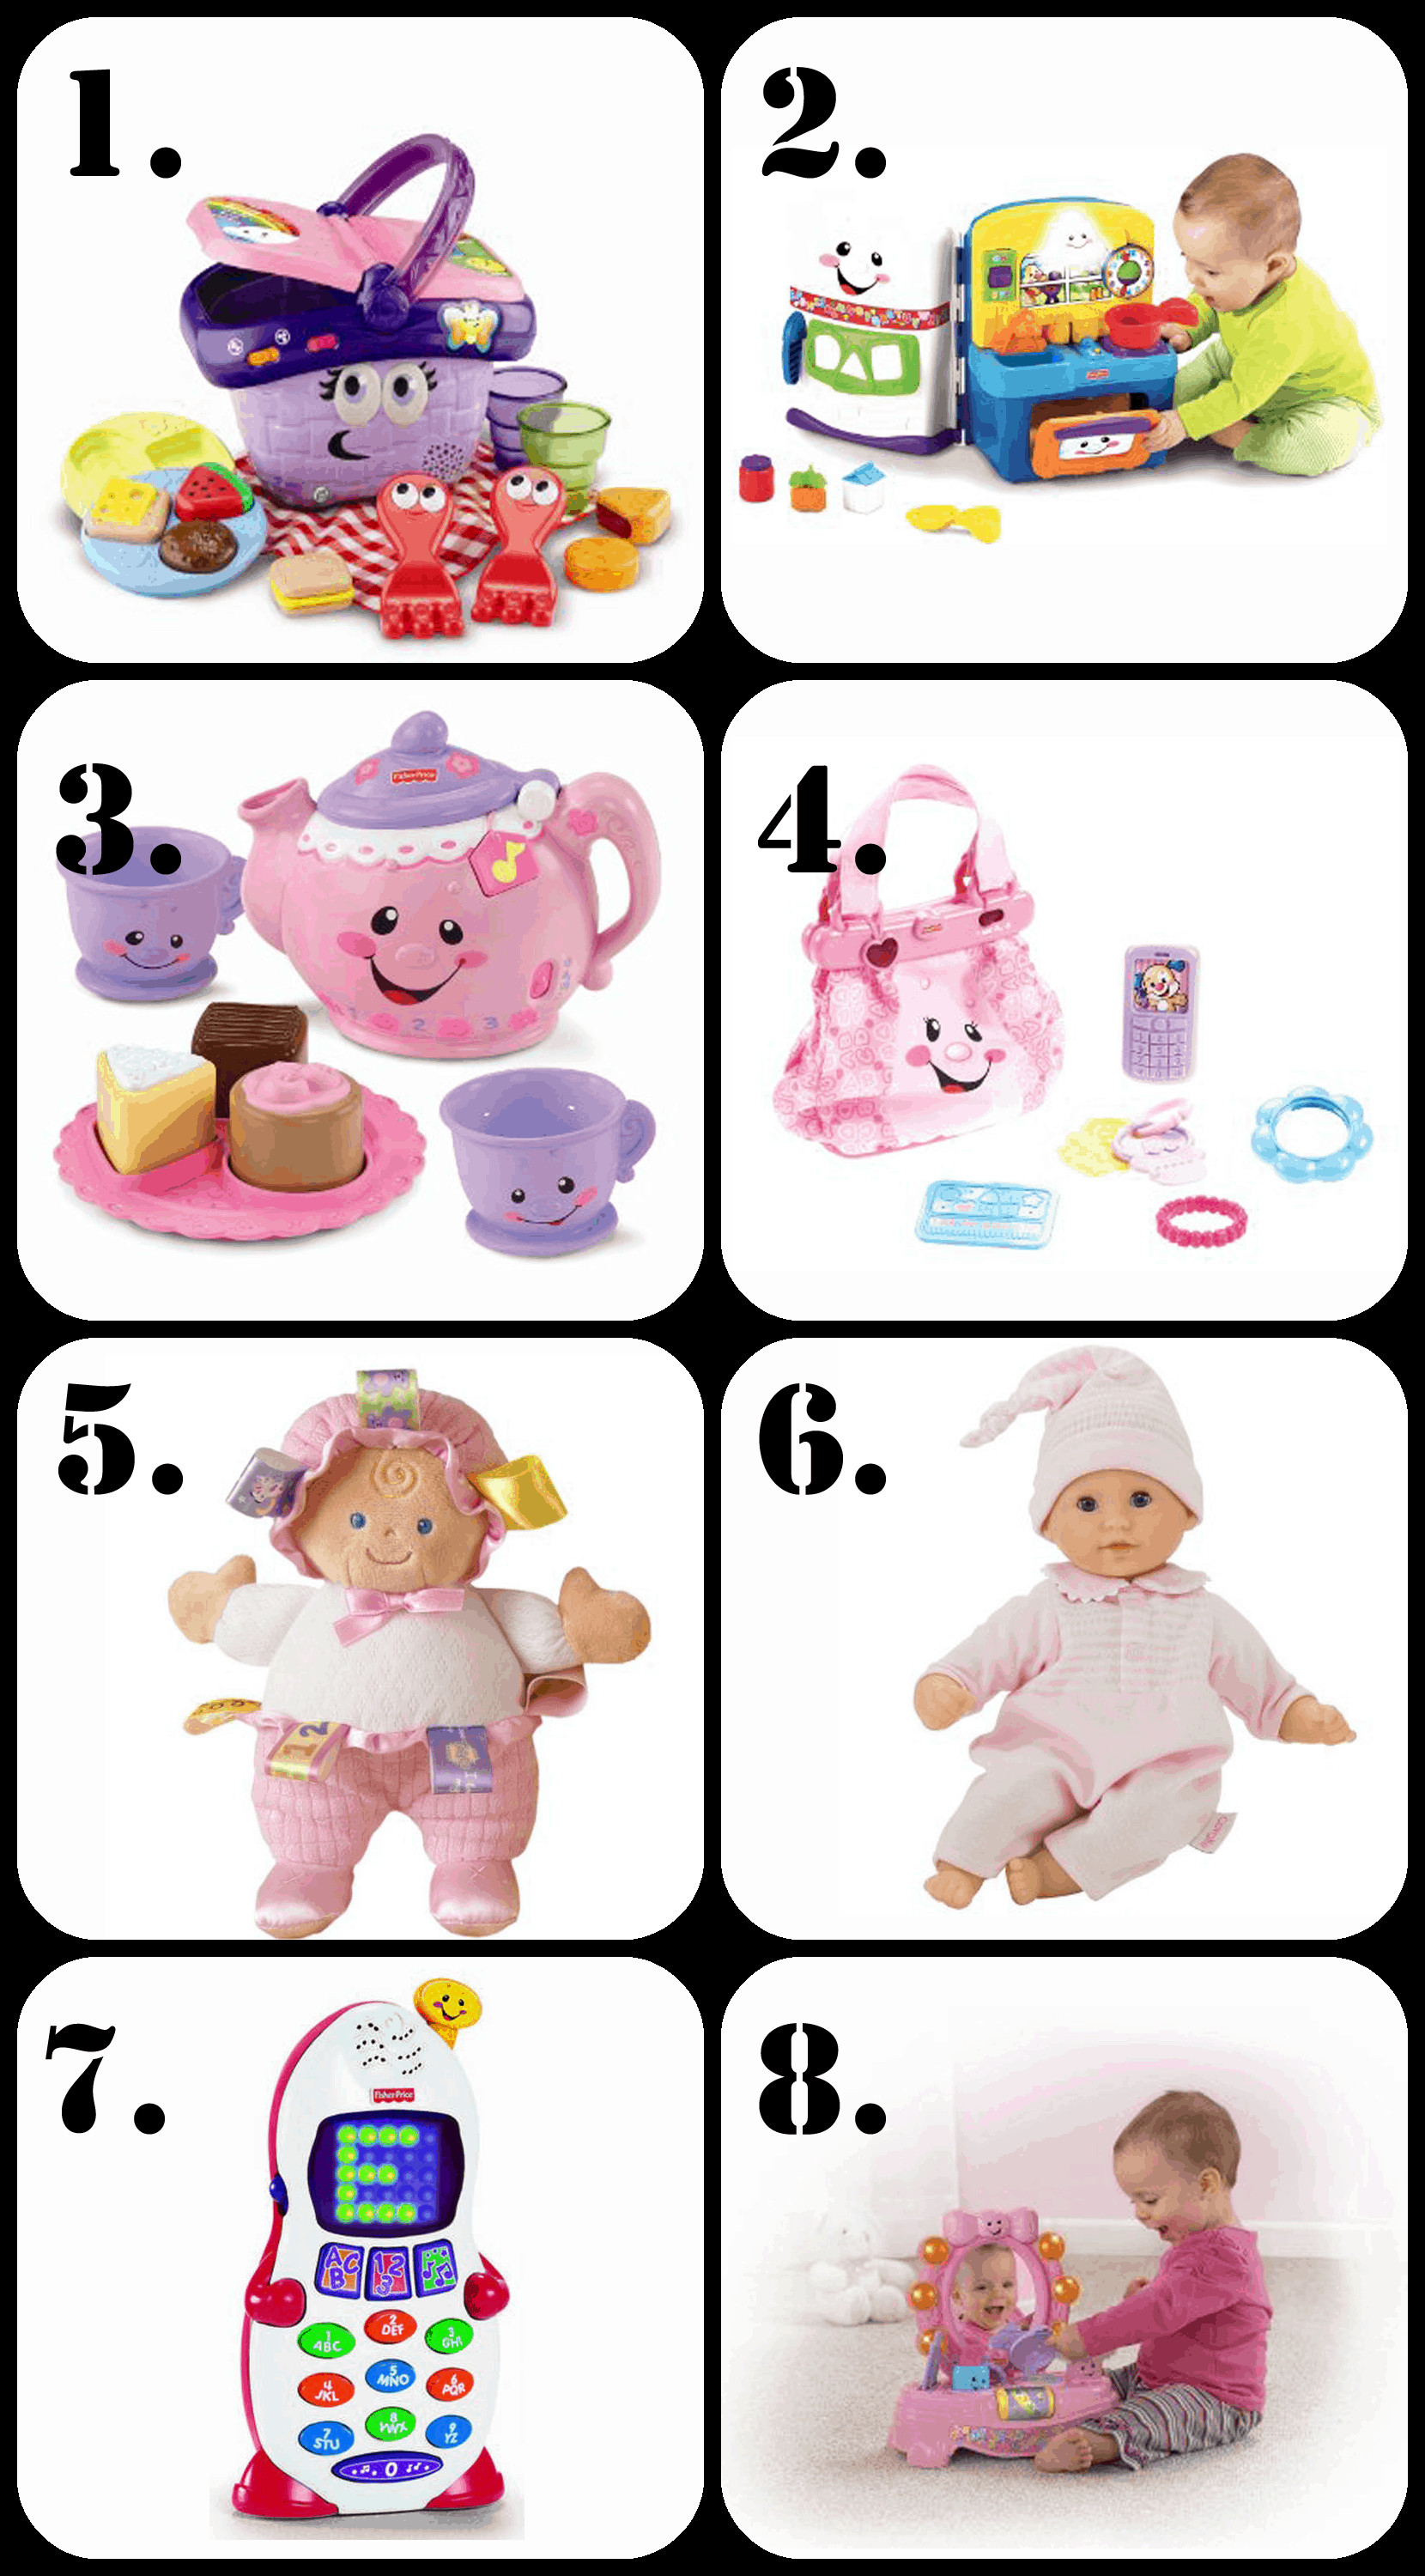 1 Year Old Birthday Gift Ideas
 The Ultimate List of Gift Ideas for a 1 Year Old Girl